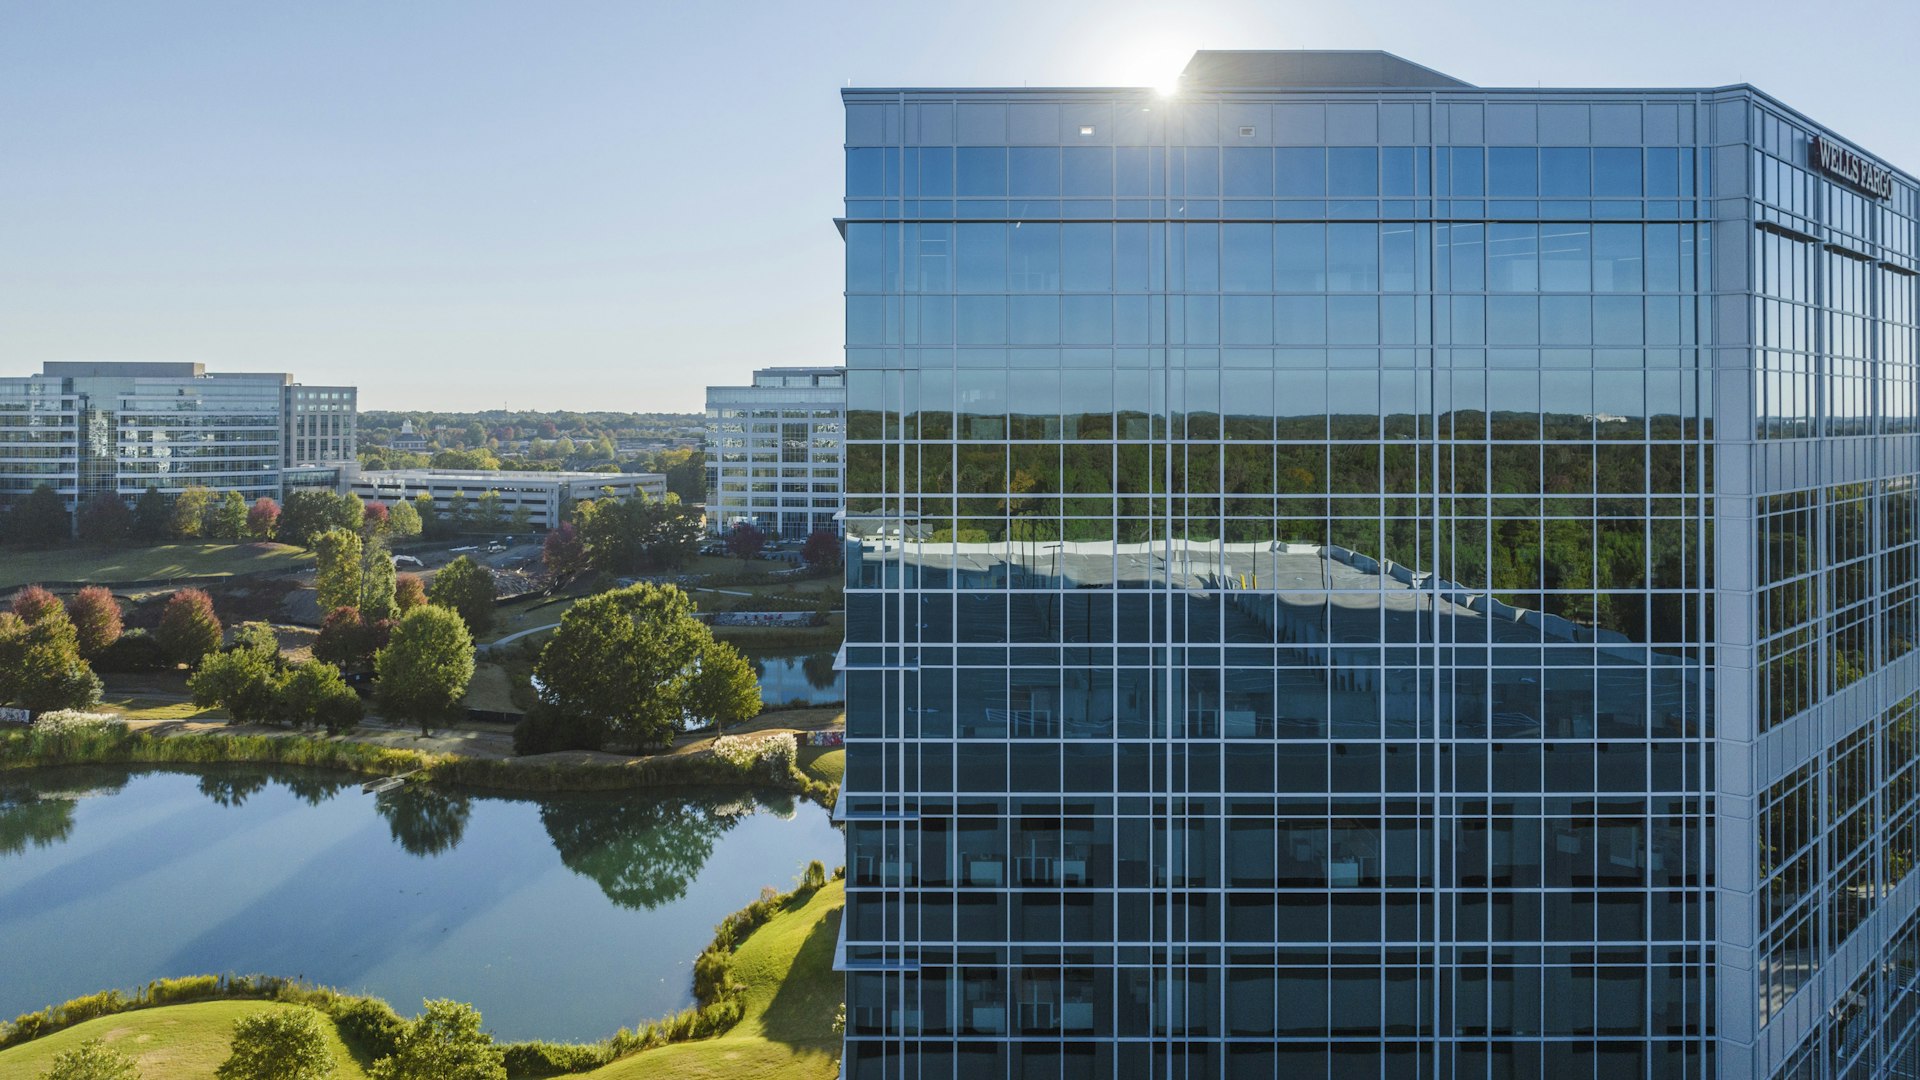 An aerial view of an office building and the surrounding greenspace at the Ballantyne campus.